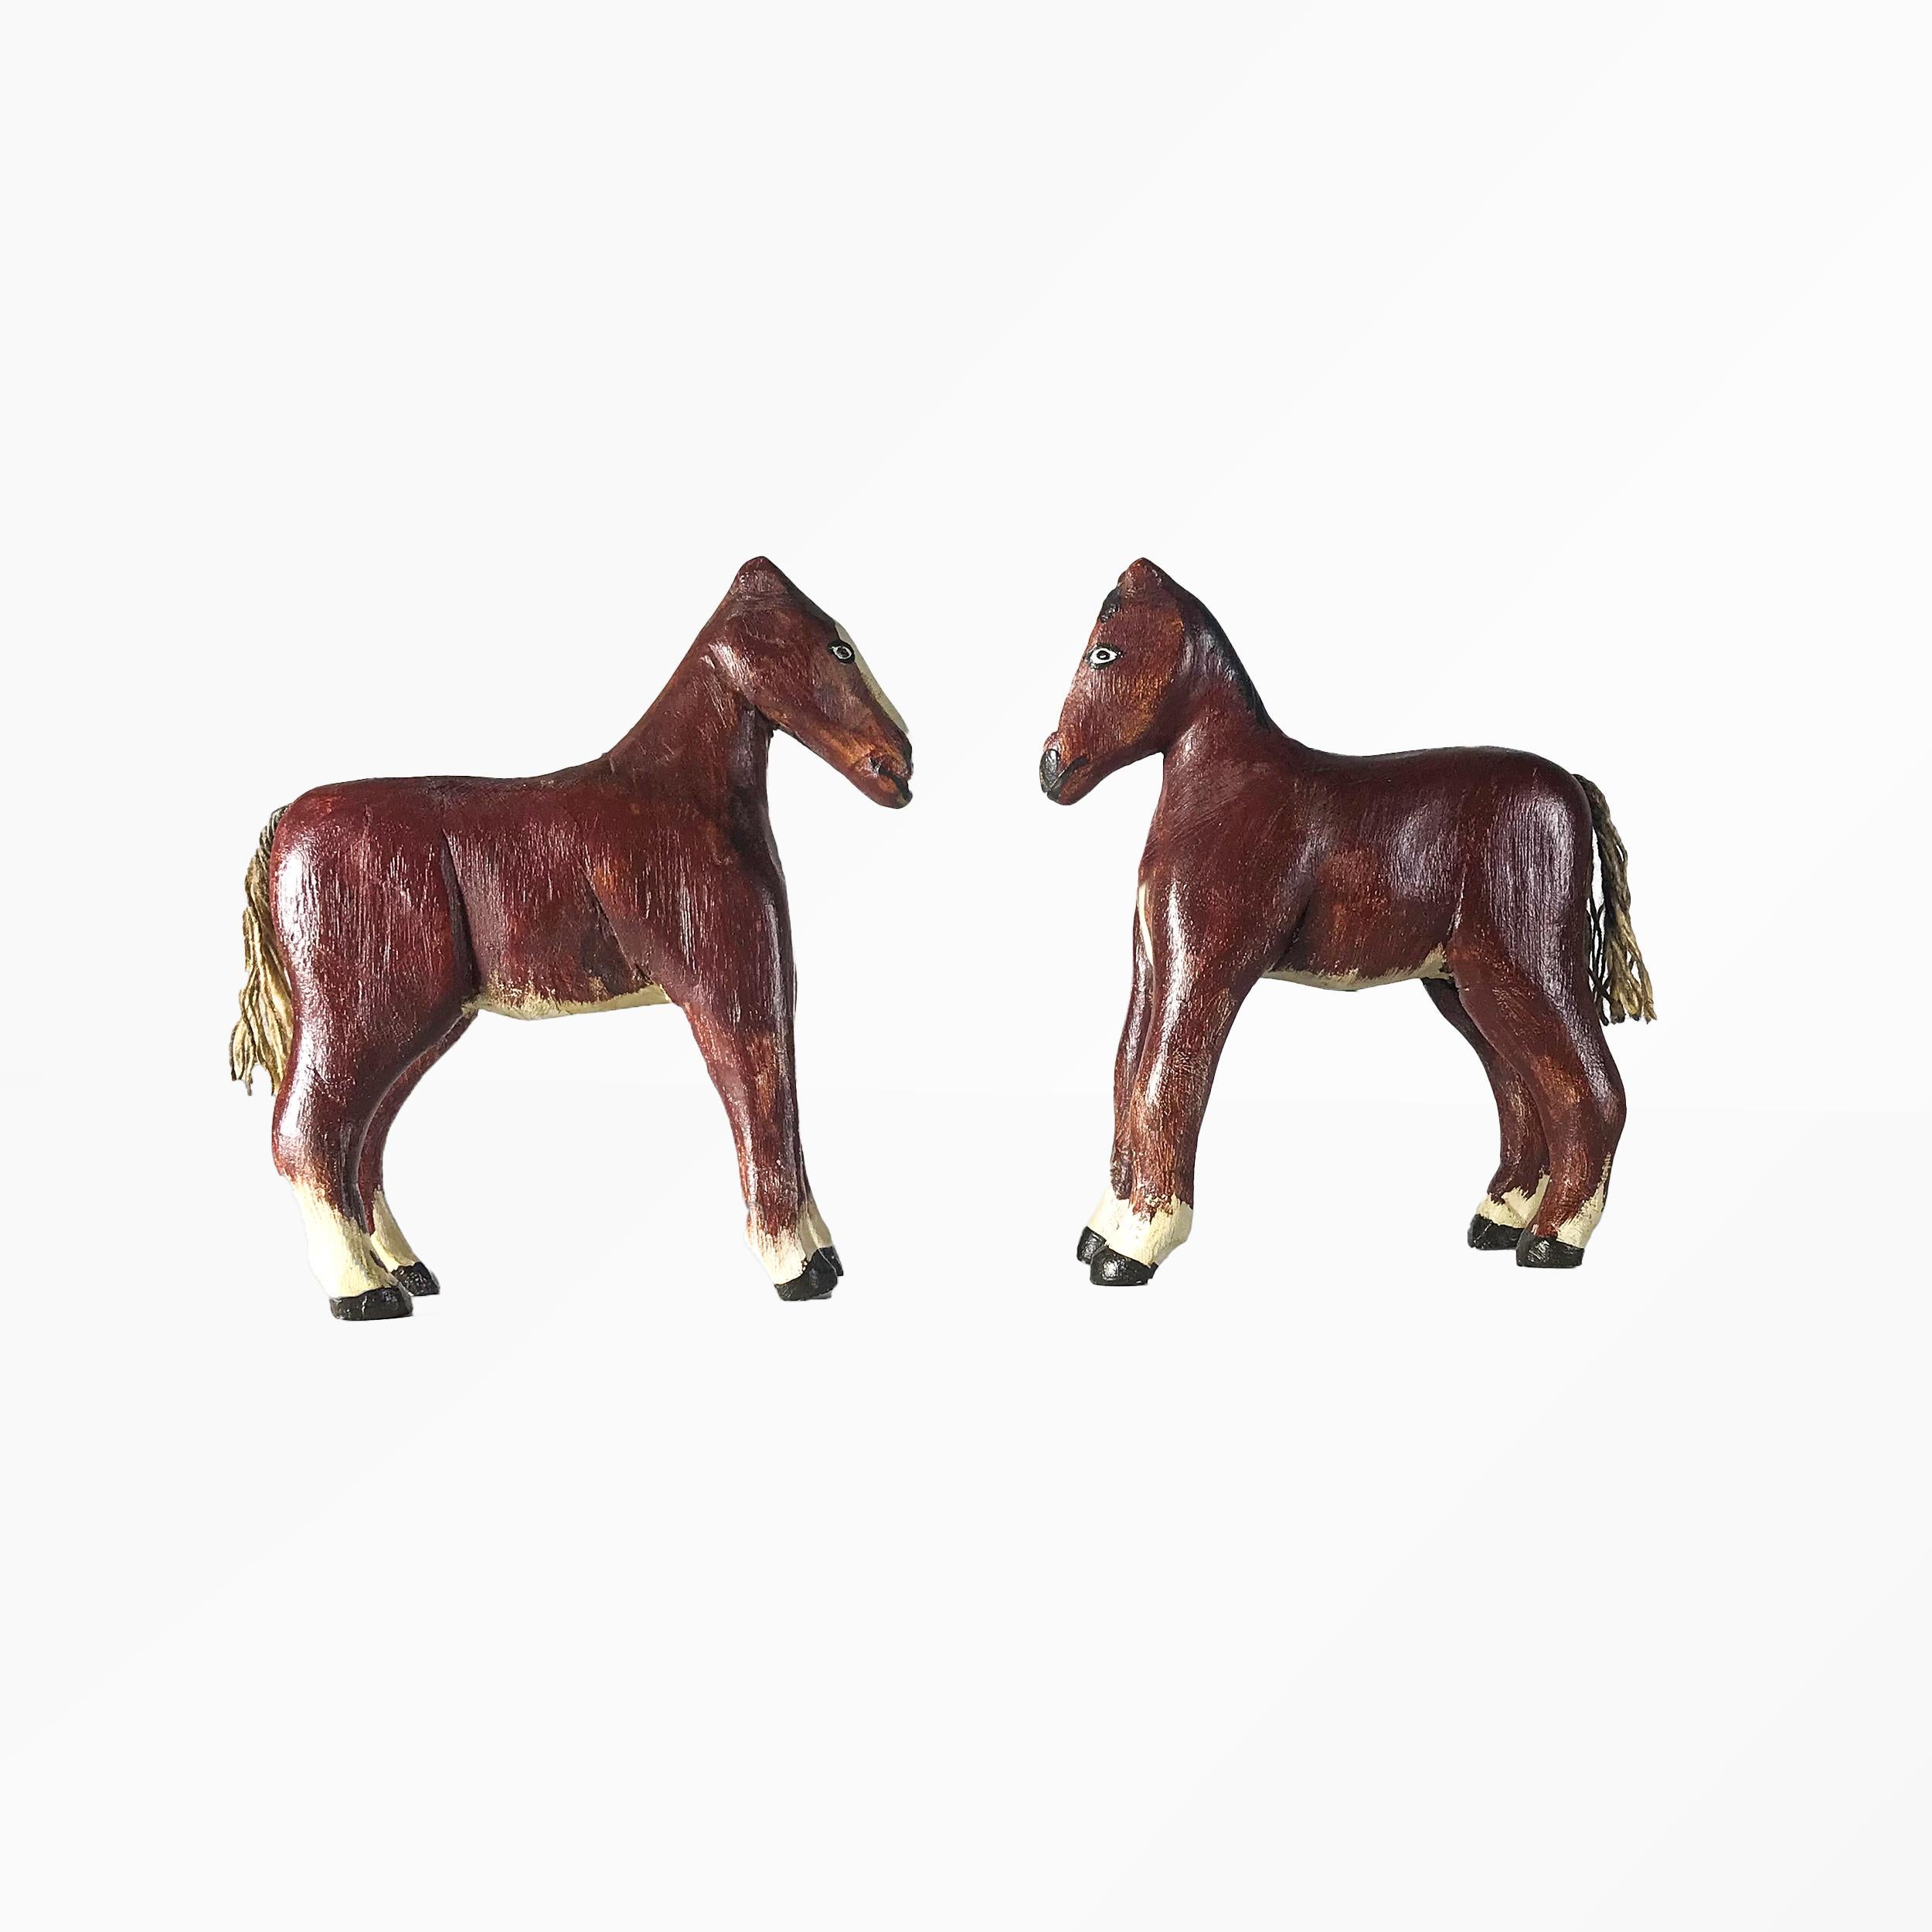 Carved horse toys in standing position, painted in a crimson brown color with painted eyes and painted mane on one side of each horse. Painted patches of white along the nose, chest, belly and ankles, with threaded tails
American, circa 1940-1950,